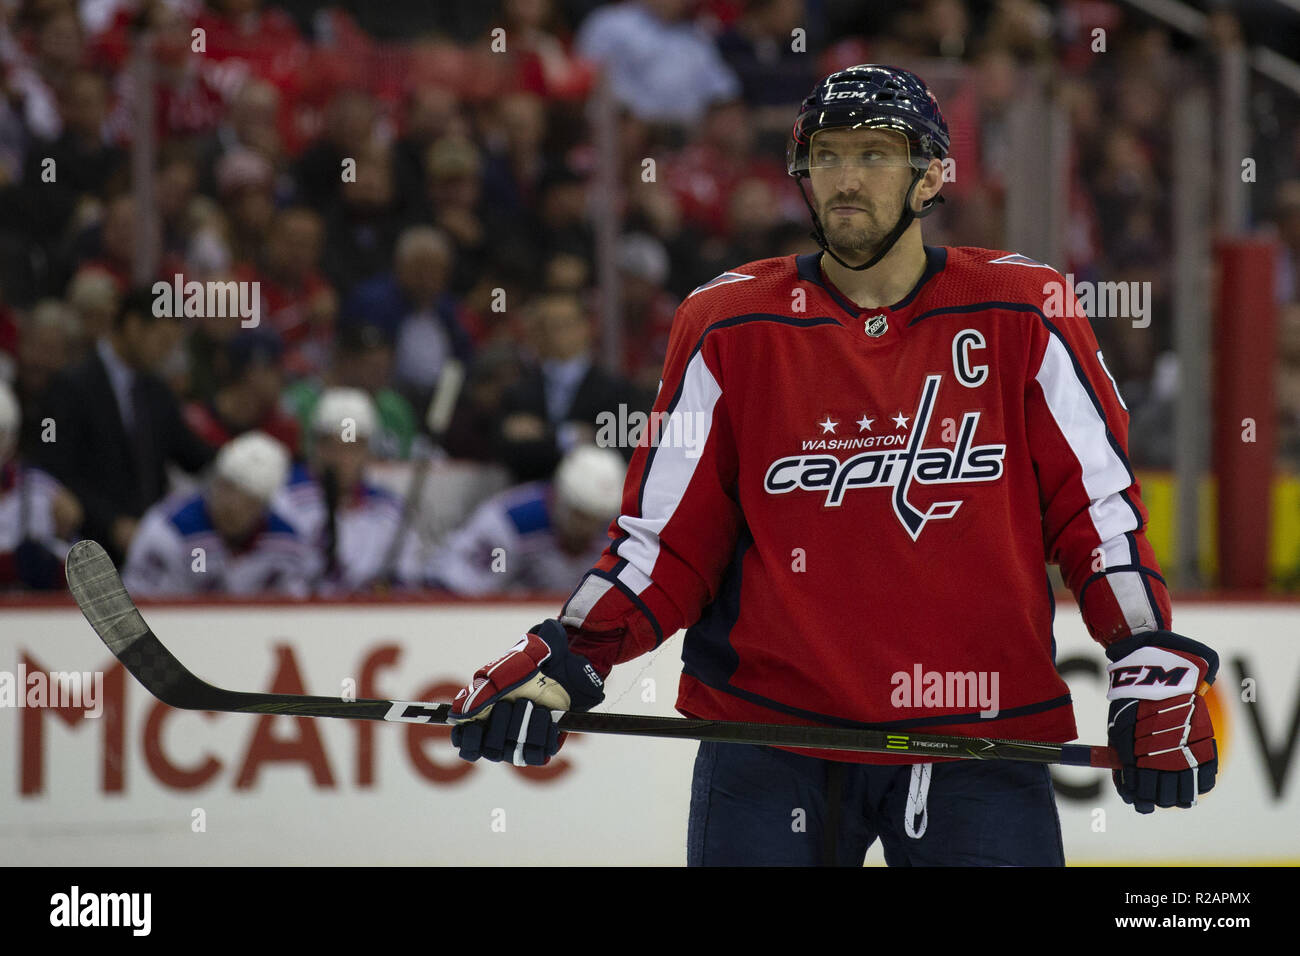 Washington, DC, USA. 17th Oct, 2018. Washington Capitals left wing Alex Ovechkin (8) looks on as he waits for a face off during the game between the New York Rangers and Washington Capitals at Capitol One Arena in Washington, DC on October 17, 2018. Credit: Alex Edelman/ZUMA Wire/Alamy Live News Stock Photo